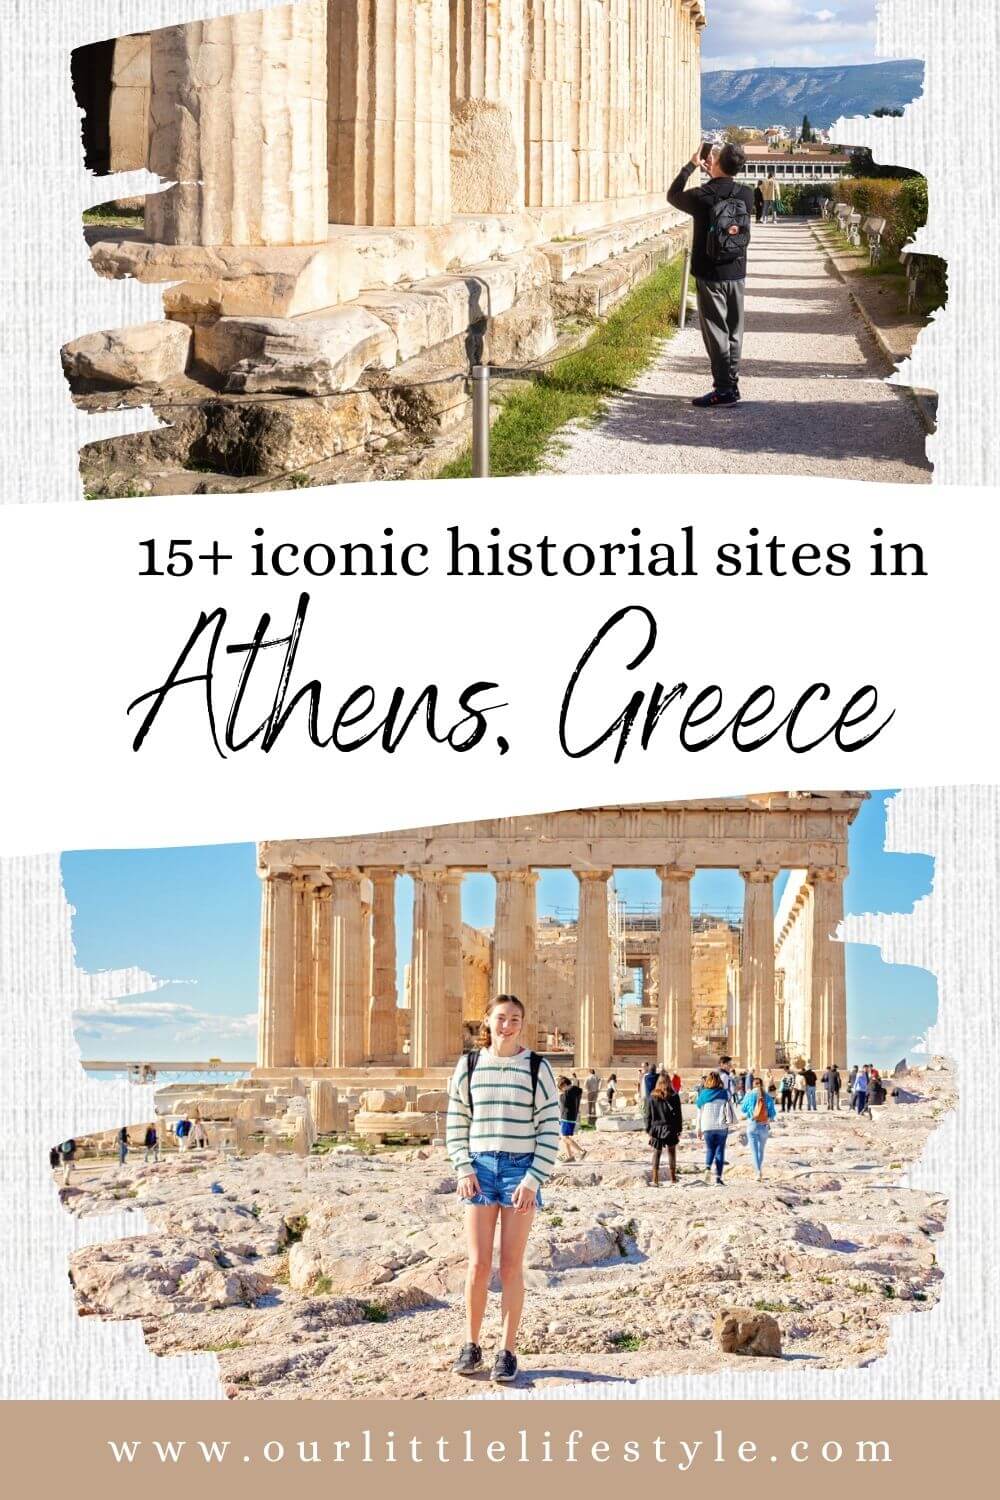 Historic Sites In Athens, Greece